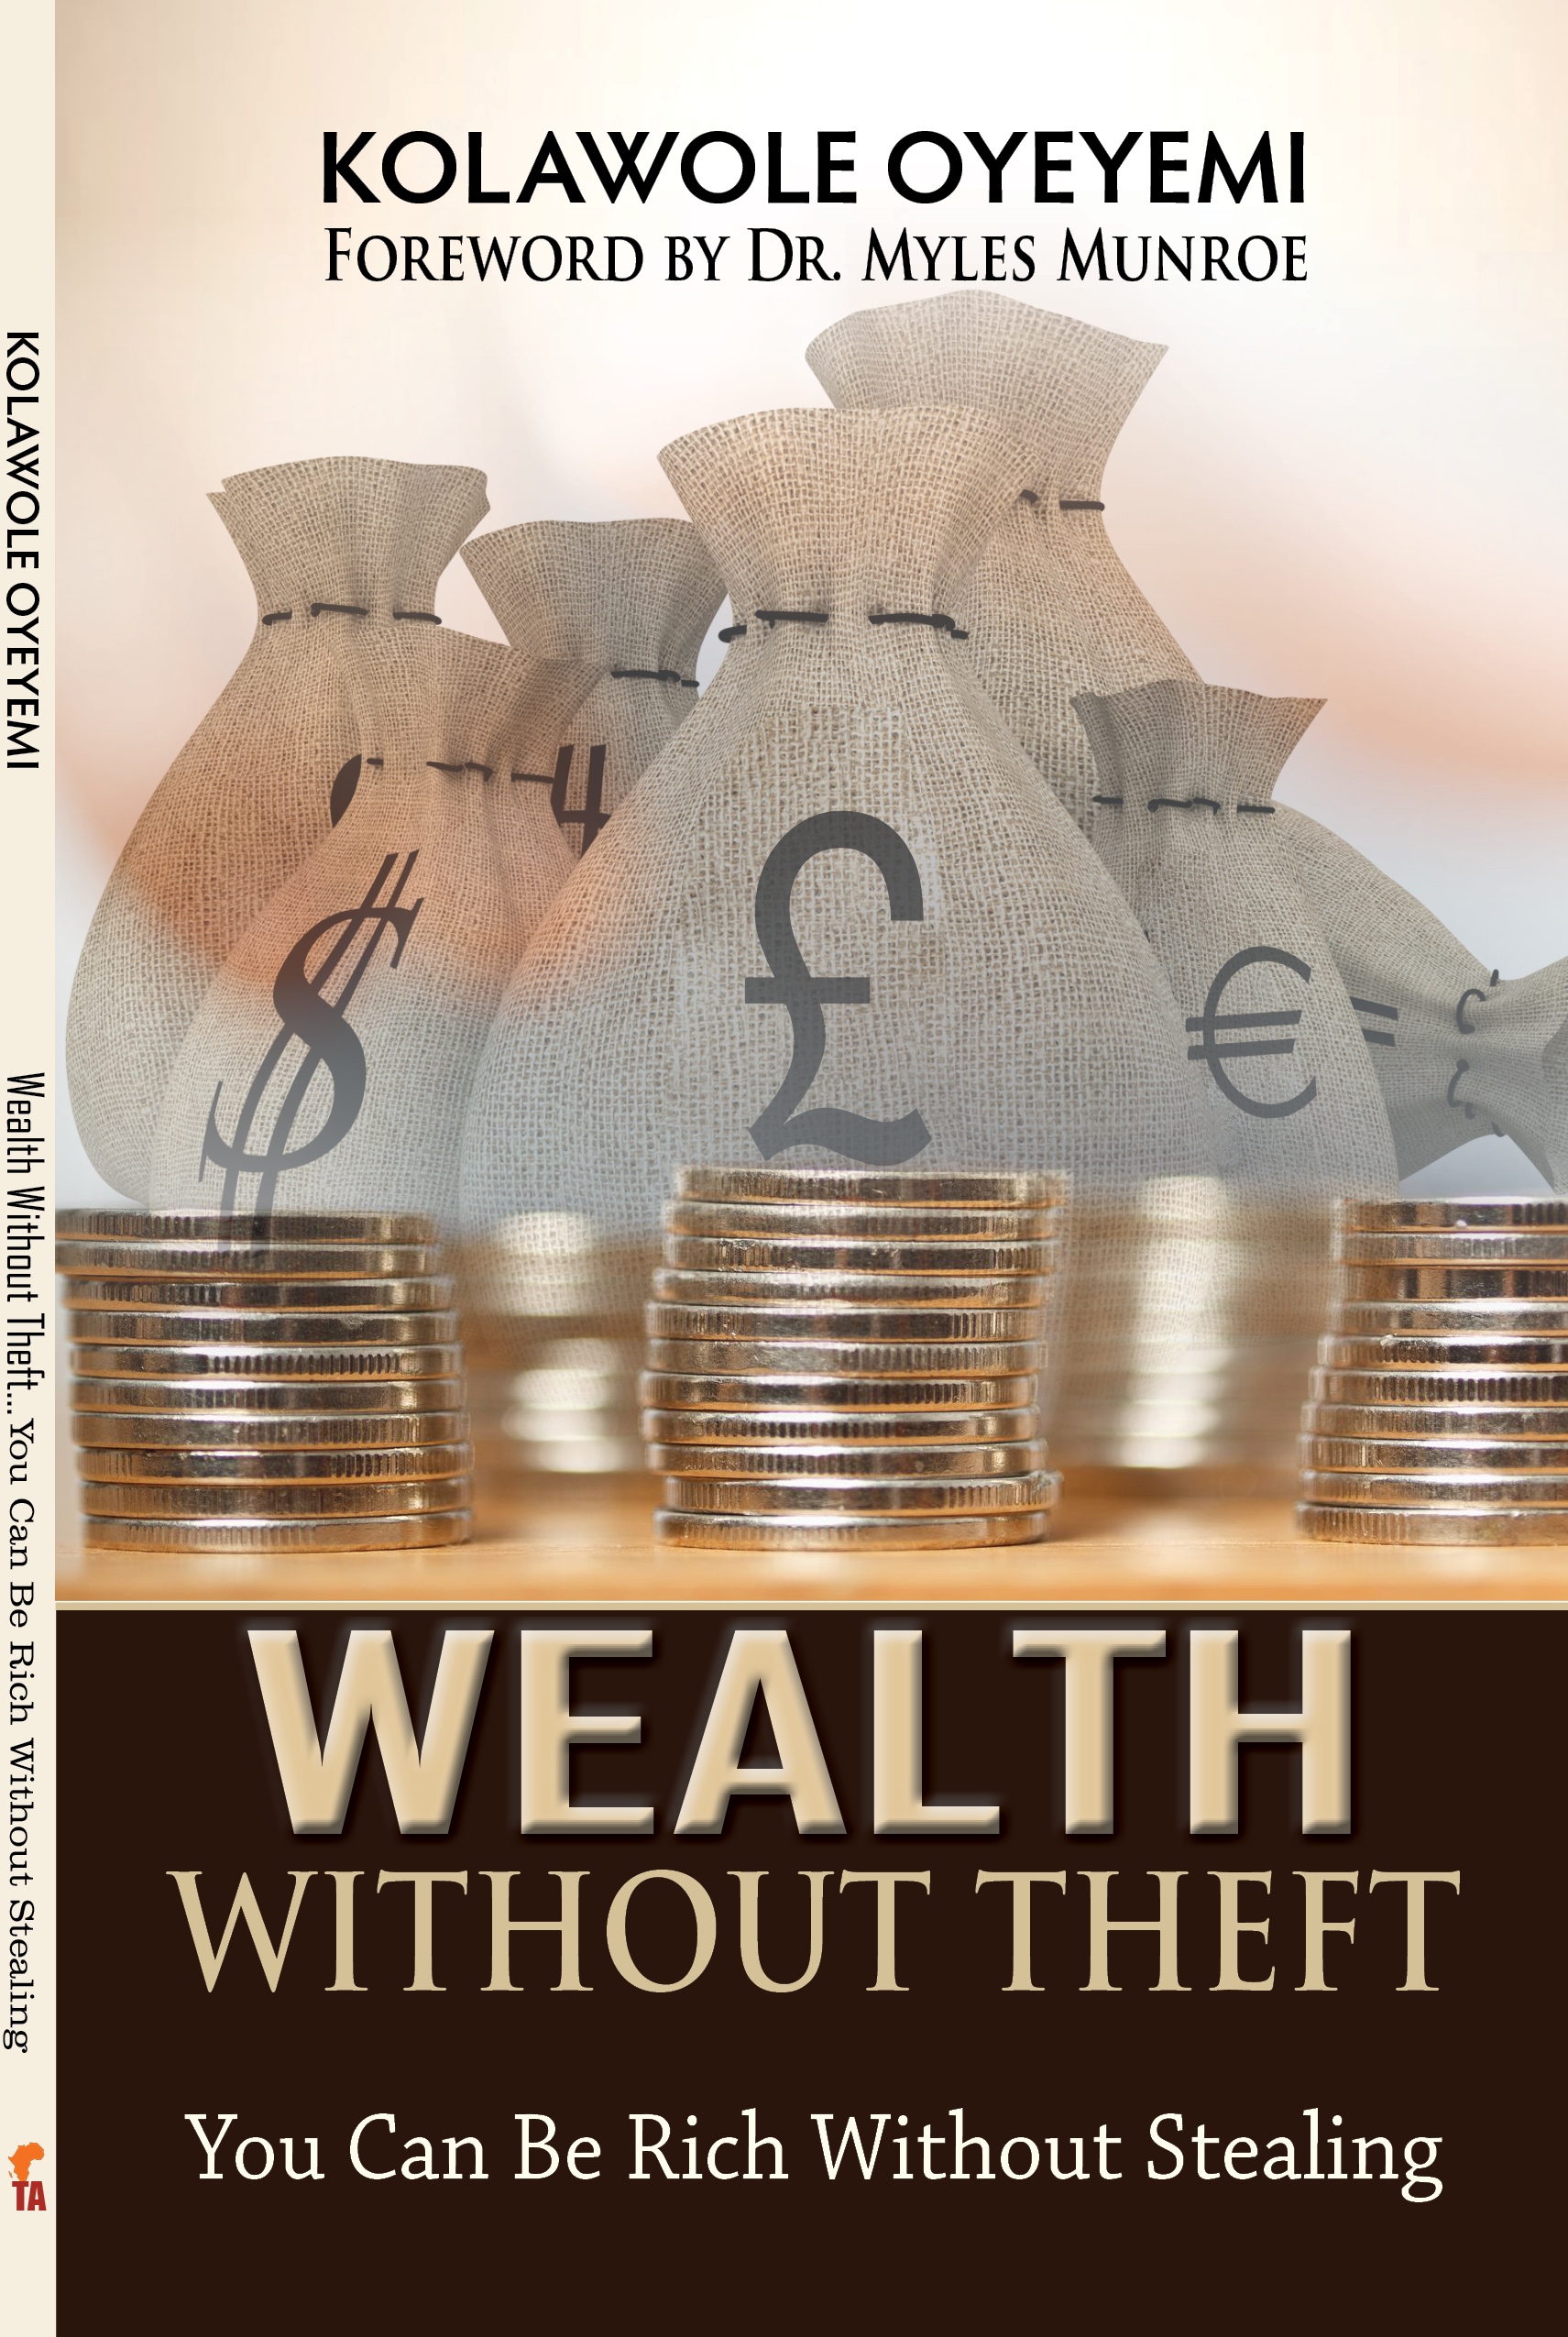 Wealth Without Theft